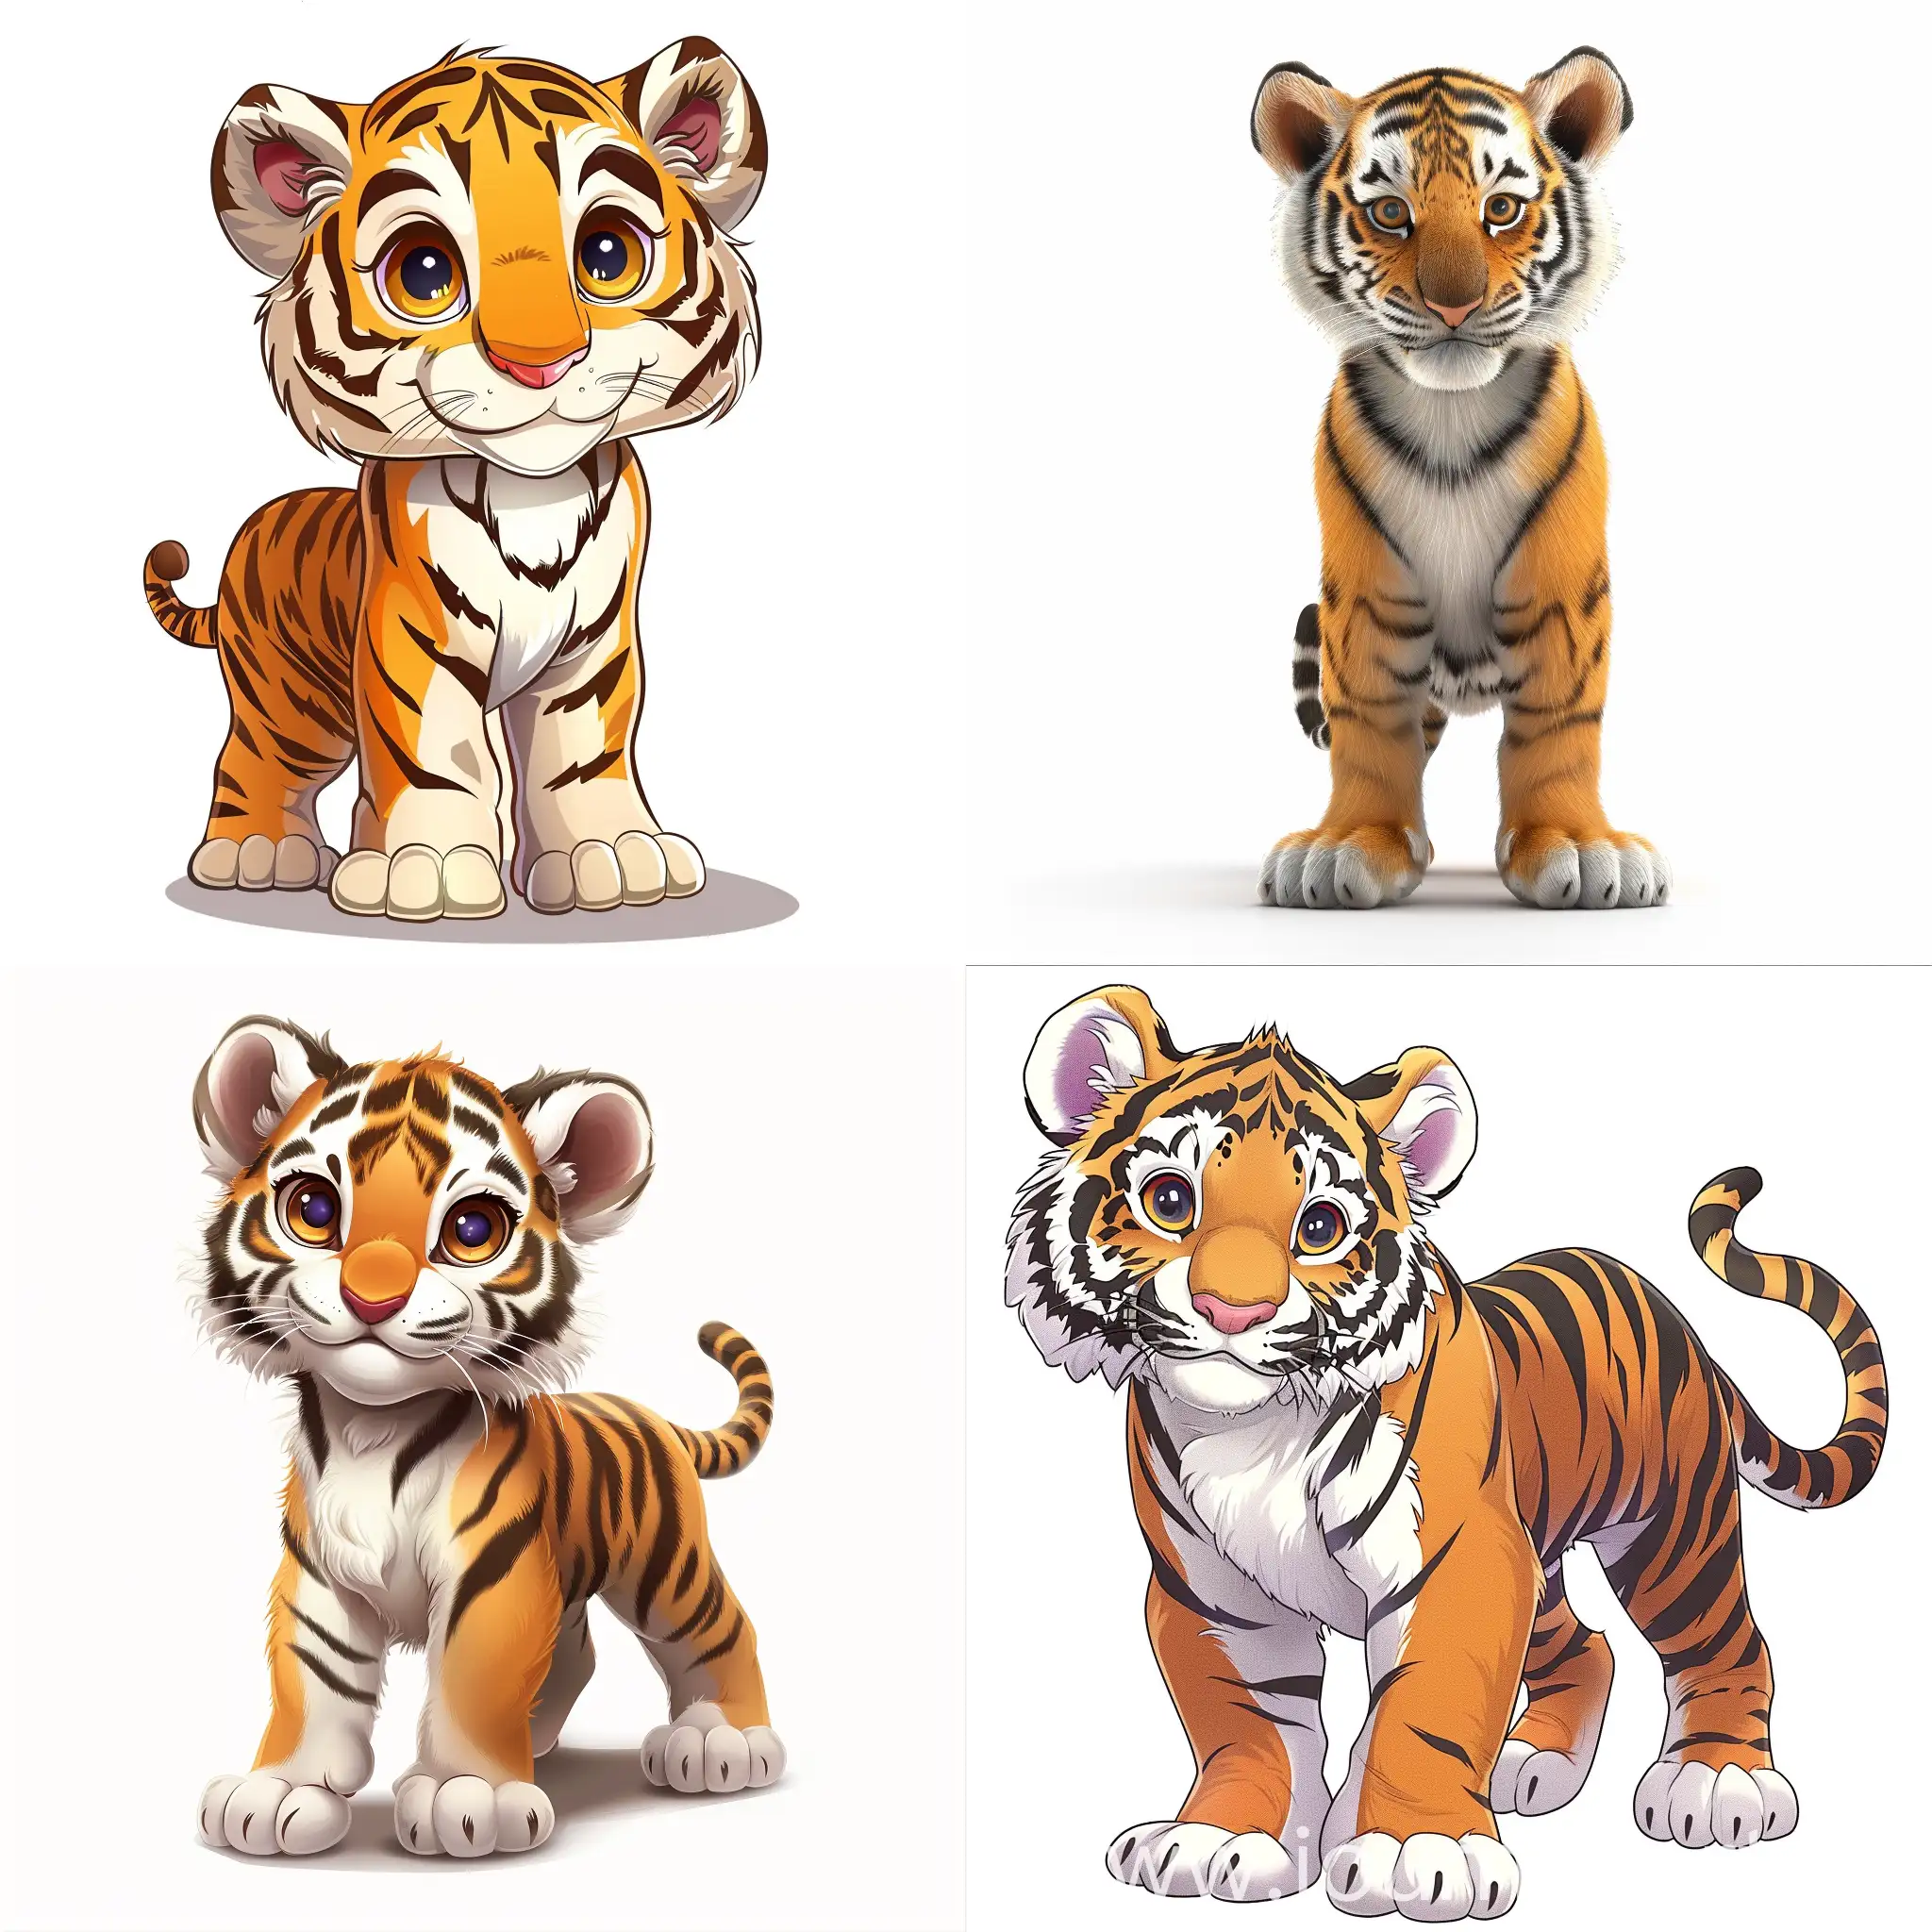 Anthropomorphic-Tiger-Cub-Standing-Cartoon-Style-on-White-Background